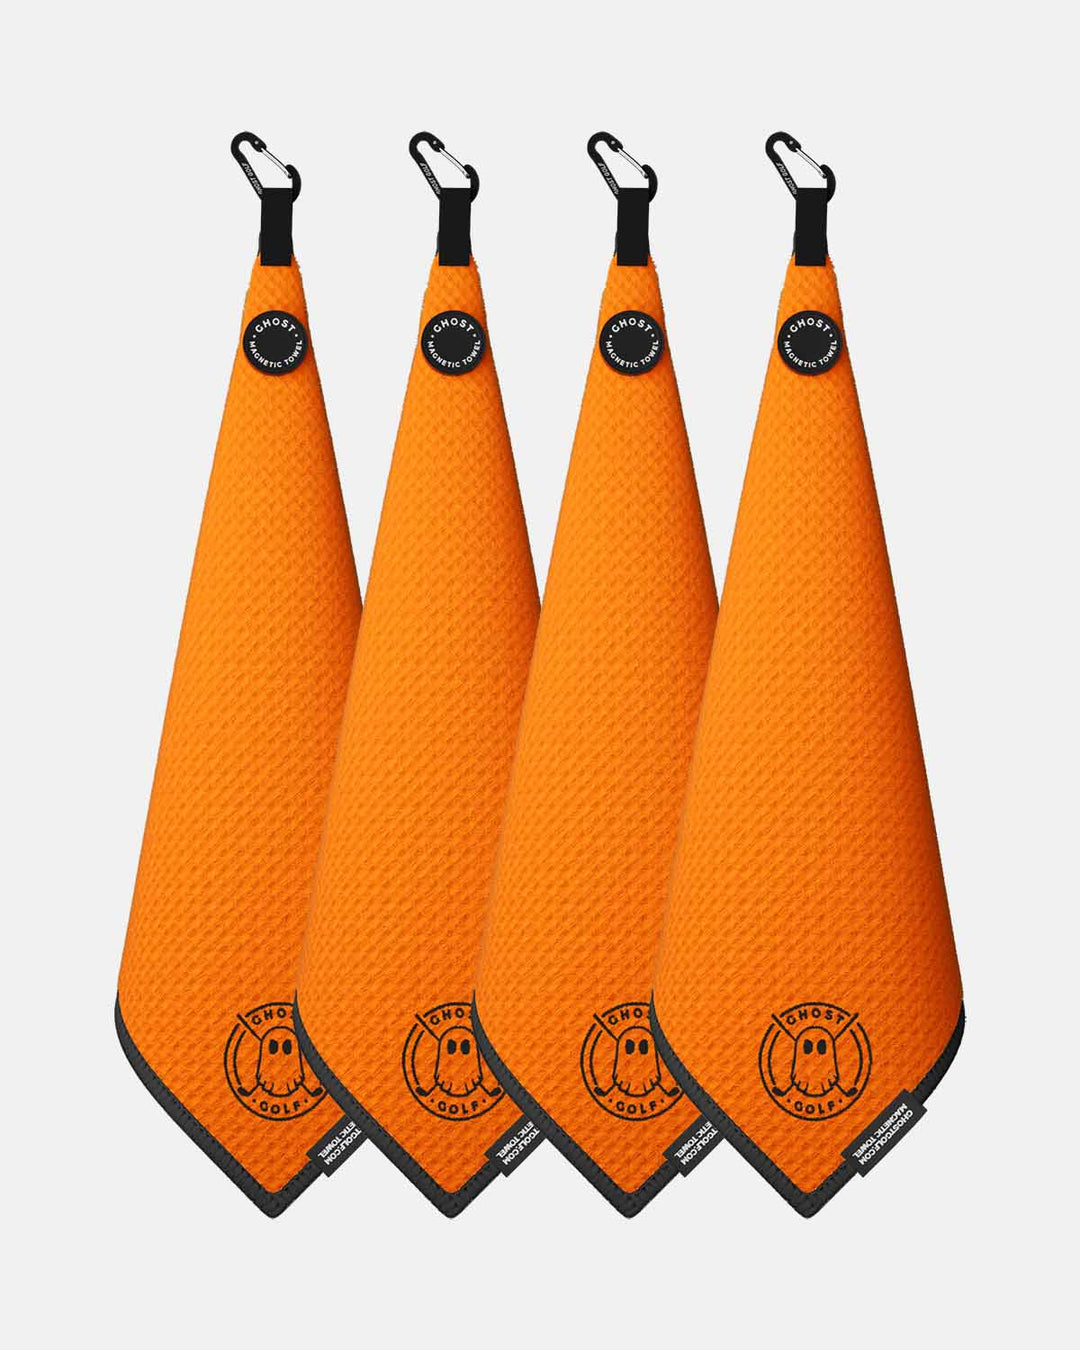 4 Ghost Golf Greenside towels with Magnet Patch and Carabiner. Color Orange